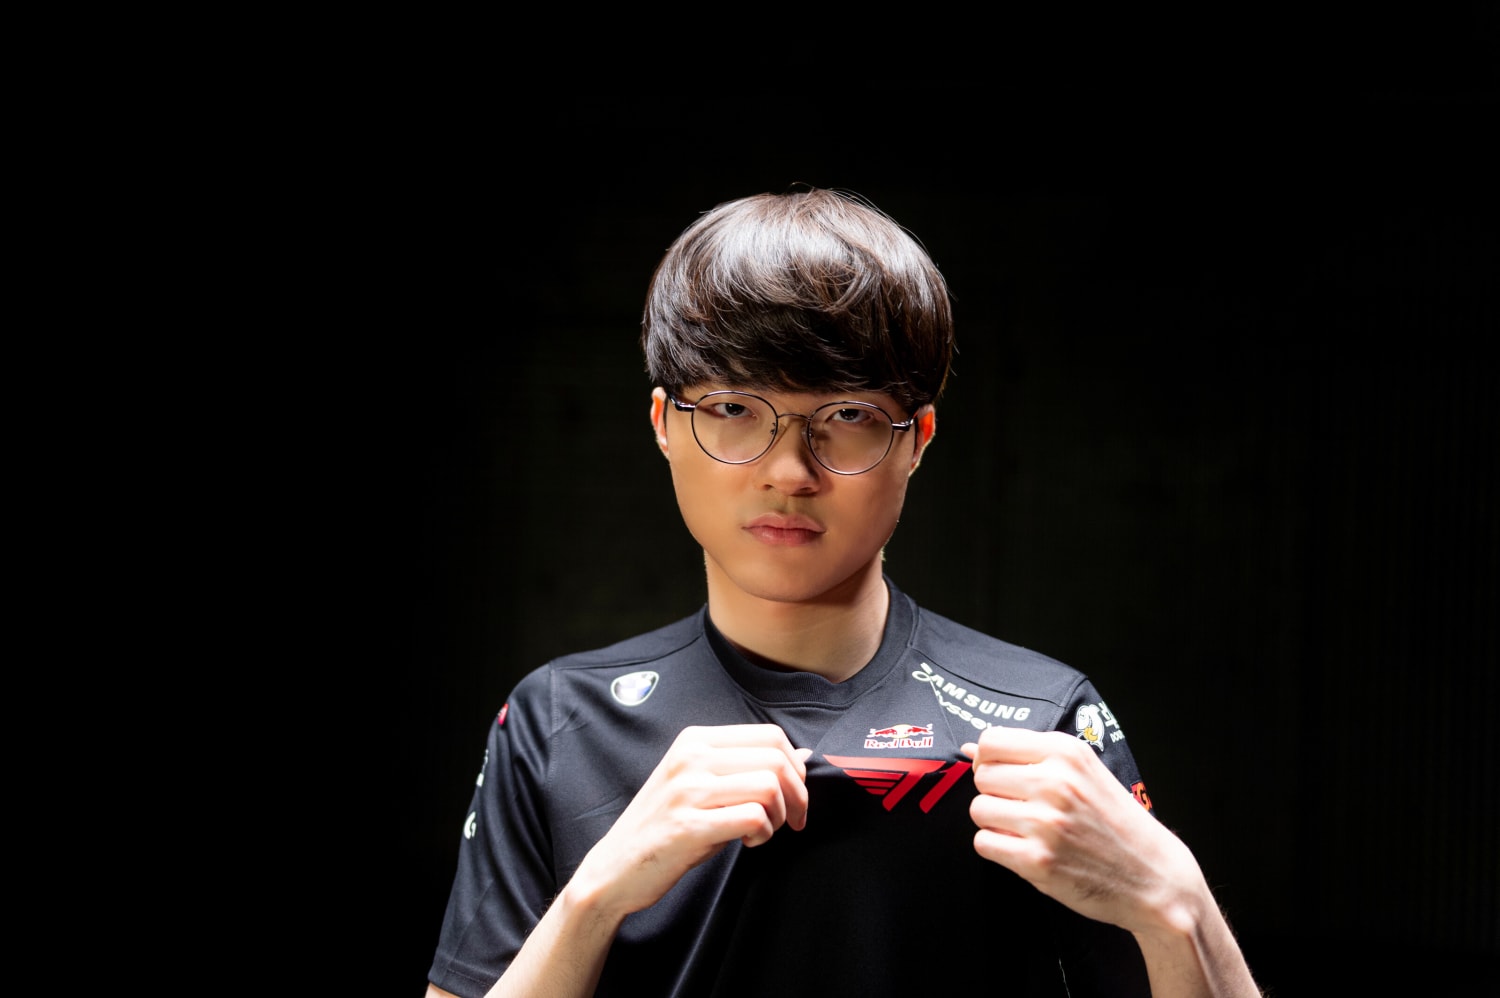 T1 Faker is finally playing League again after more than 2 weeks